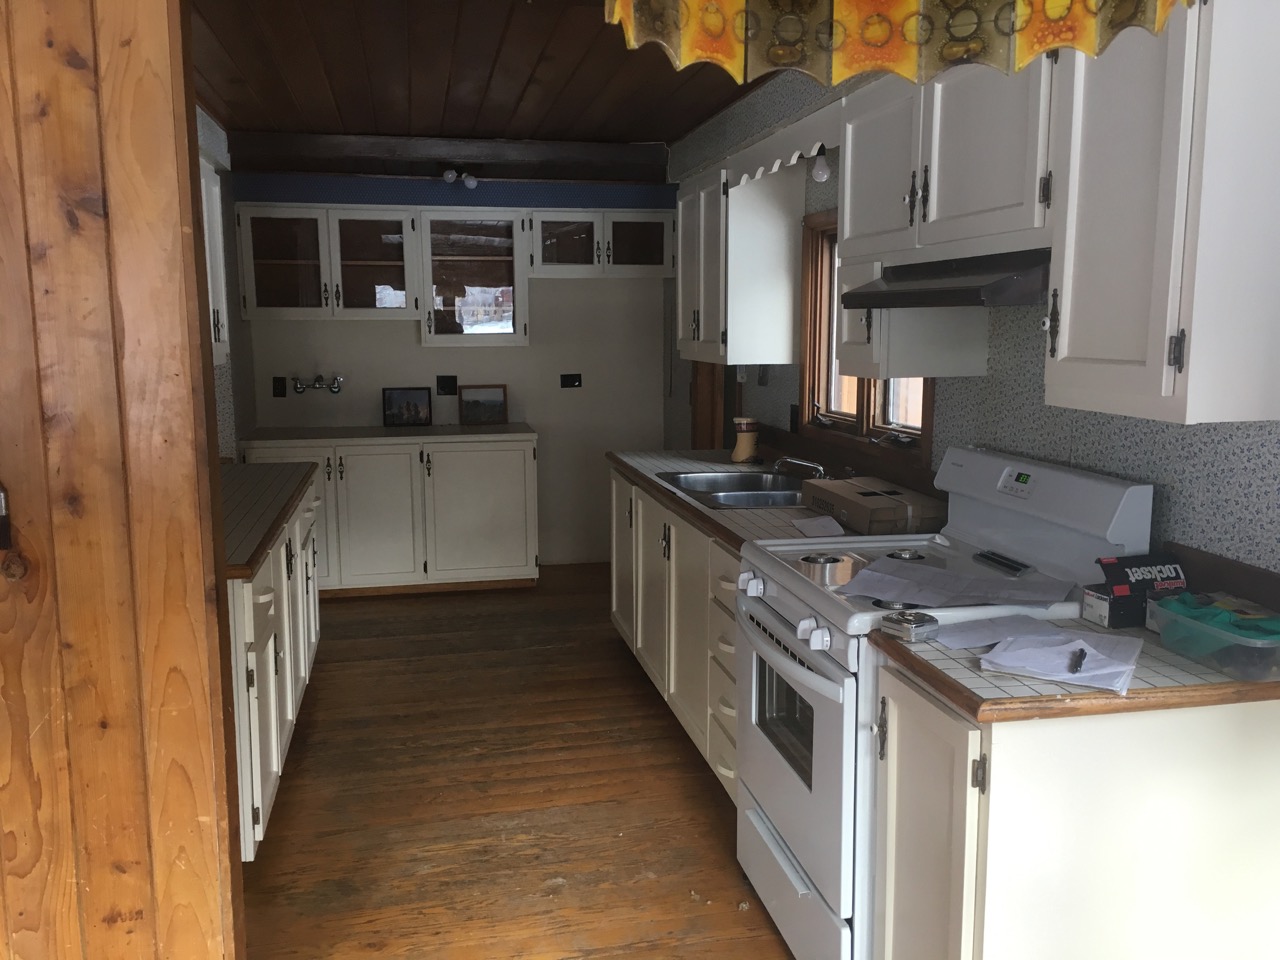 Existing kitchen (looks normal right?)